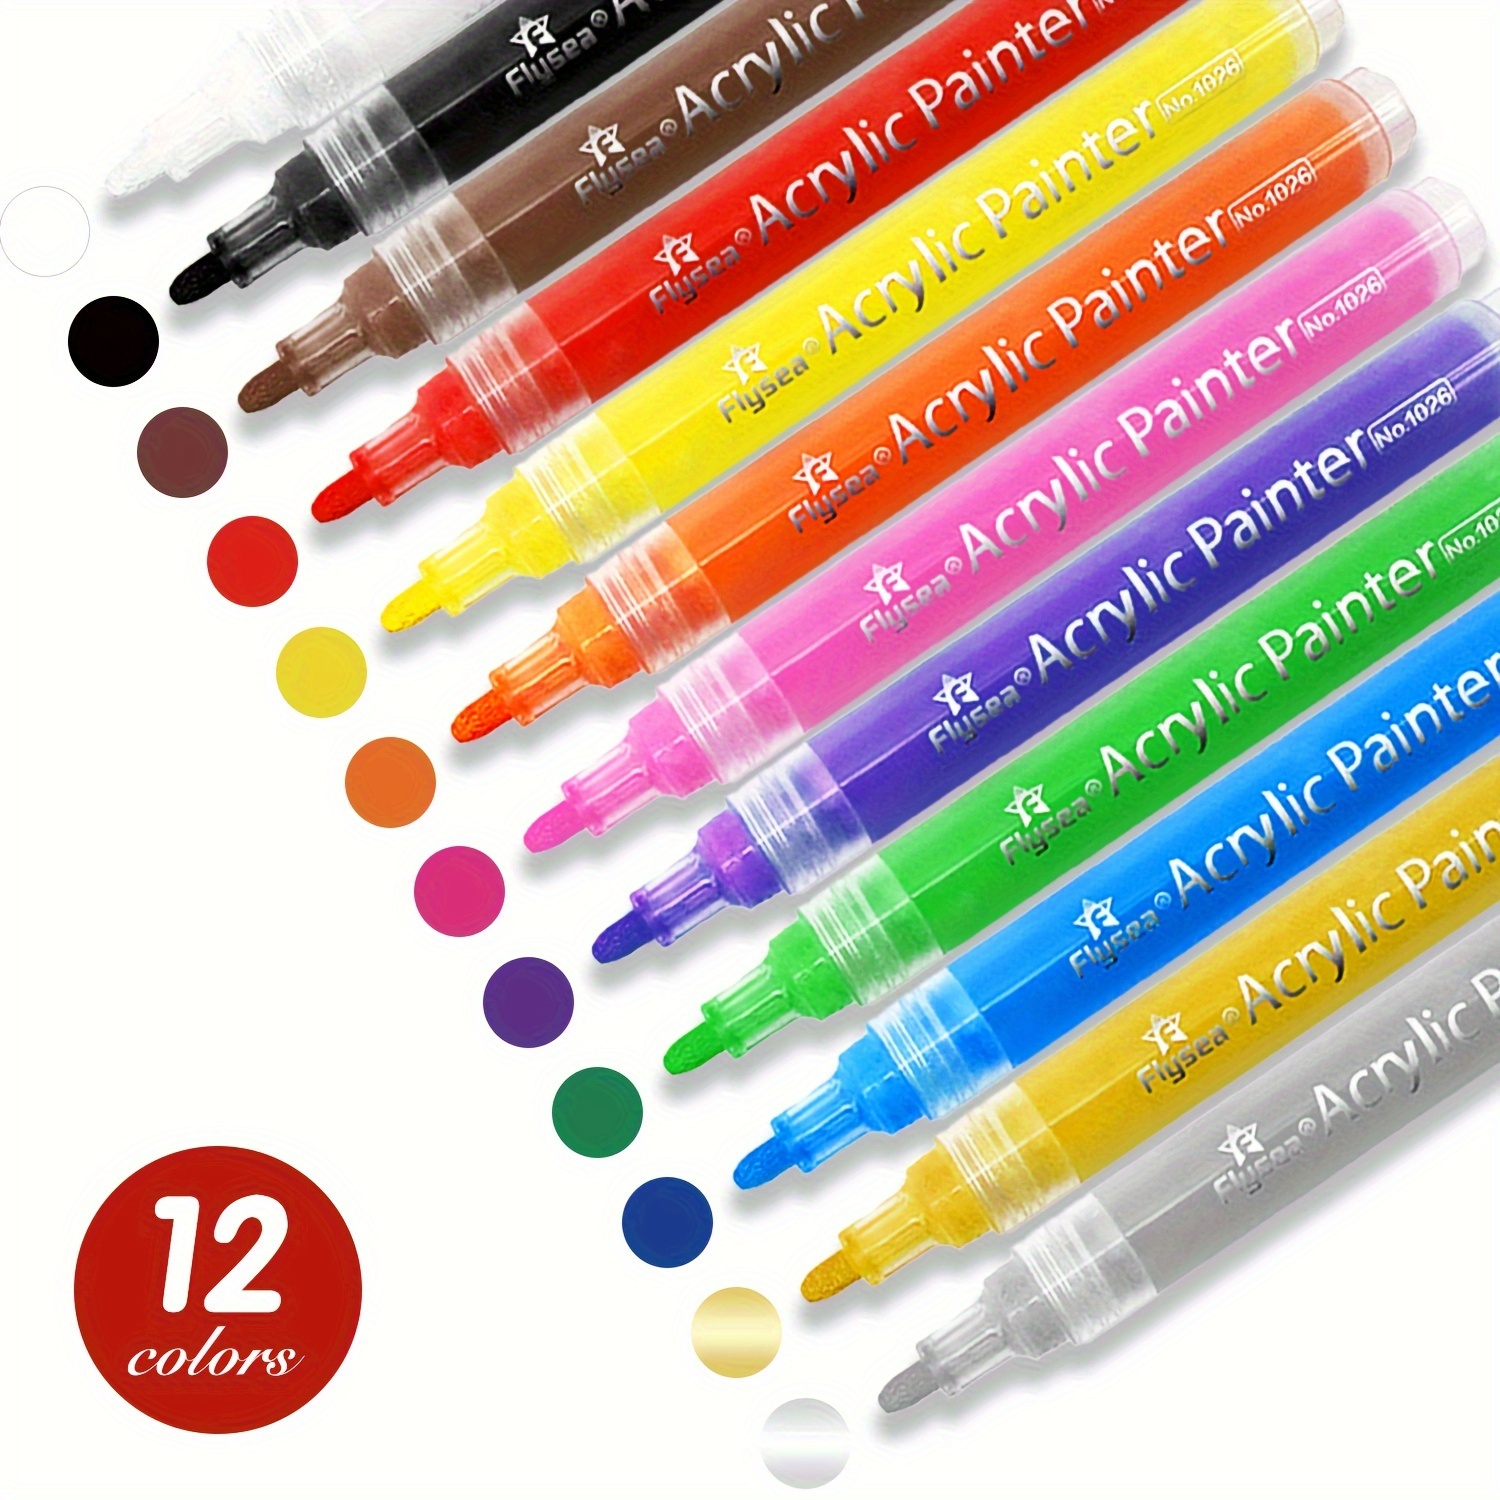 Acrylic Marker Pens, Large Capacity Paint Marker for Rock Painting